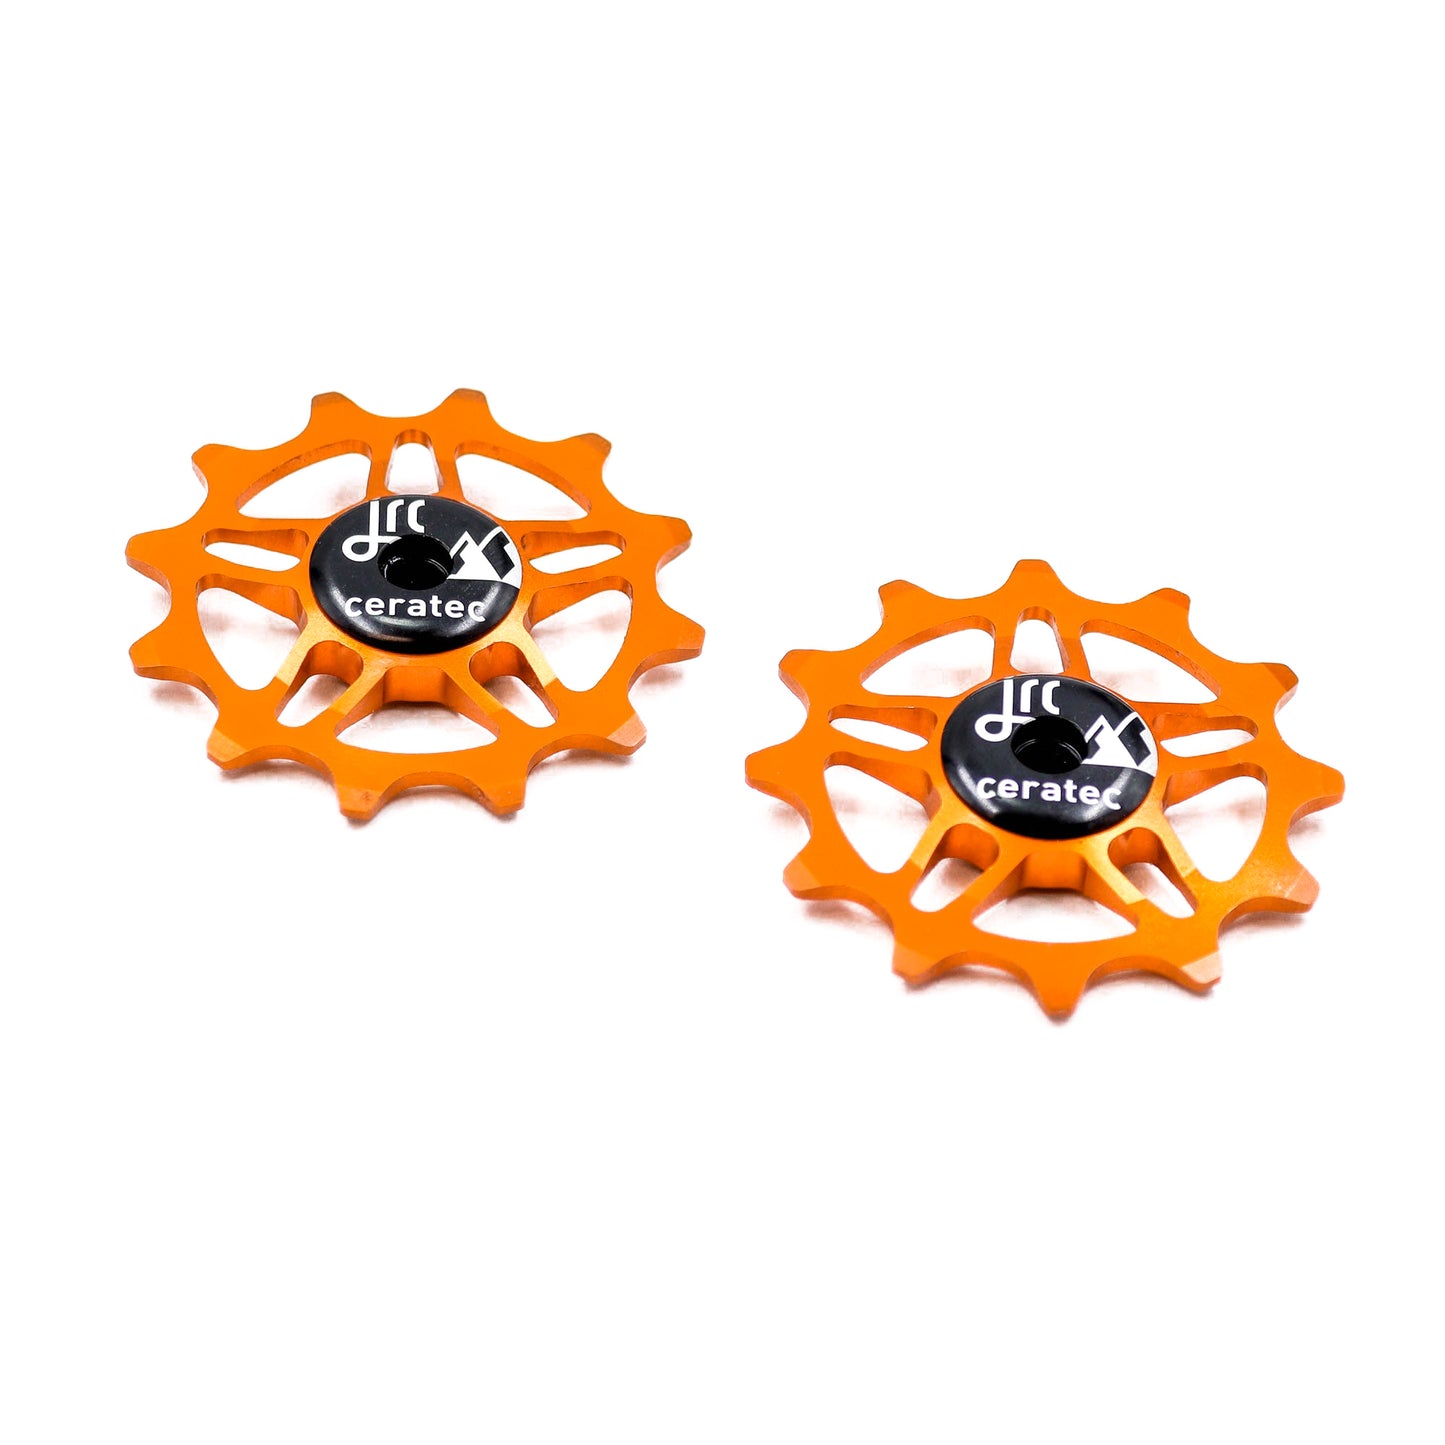 Orange, lightweight aluminium pulley wheel set for bicycles, compatible with 12 tooth SRAM Rival/ Force/ Red/ AXS